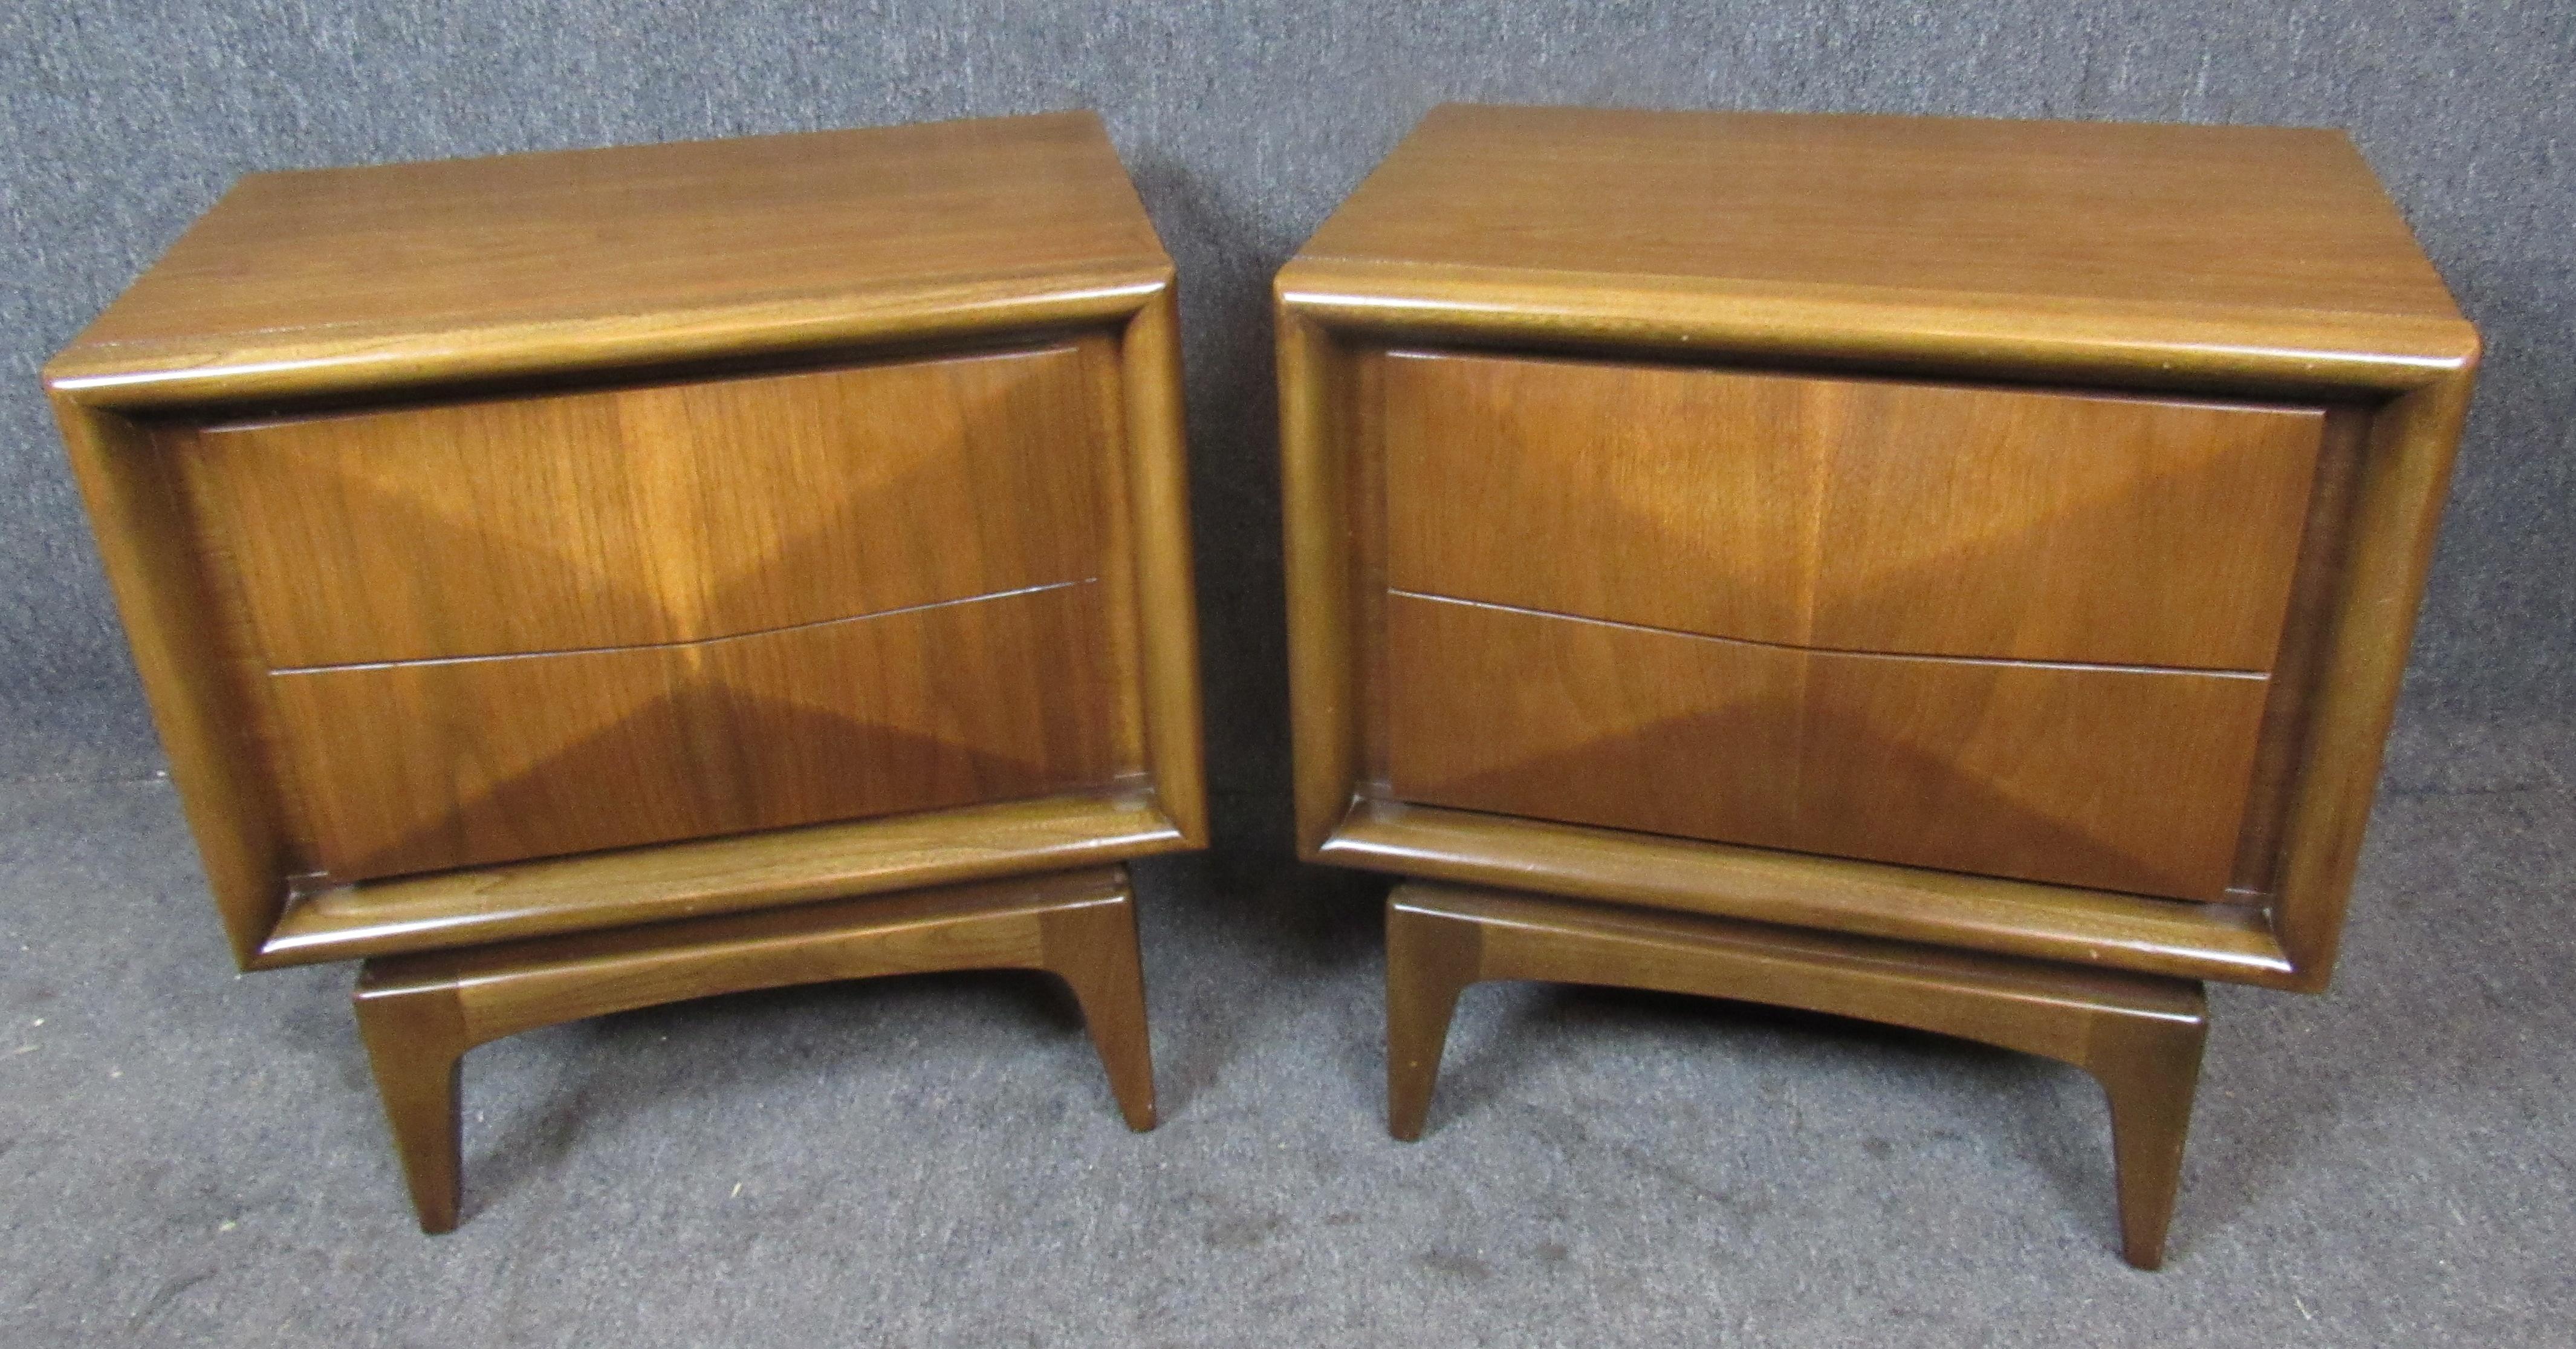 Pair of midcentury walnut bedside tables by United. Unique diamond front drawers with tapered legs.
Please confirm location NY or NJ.